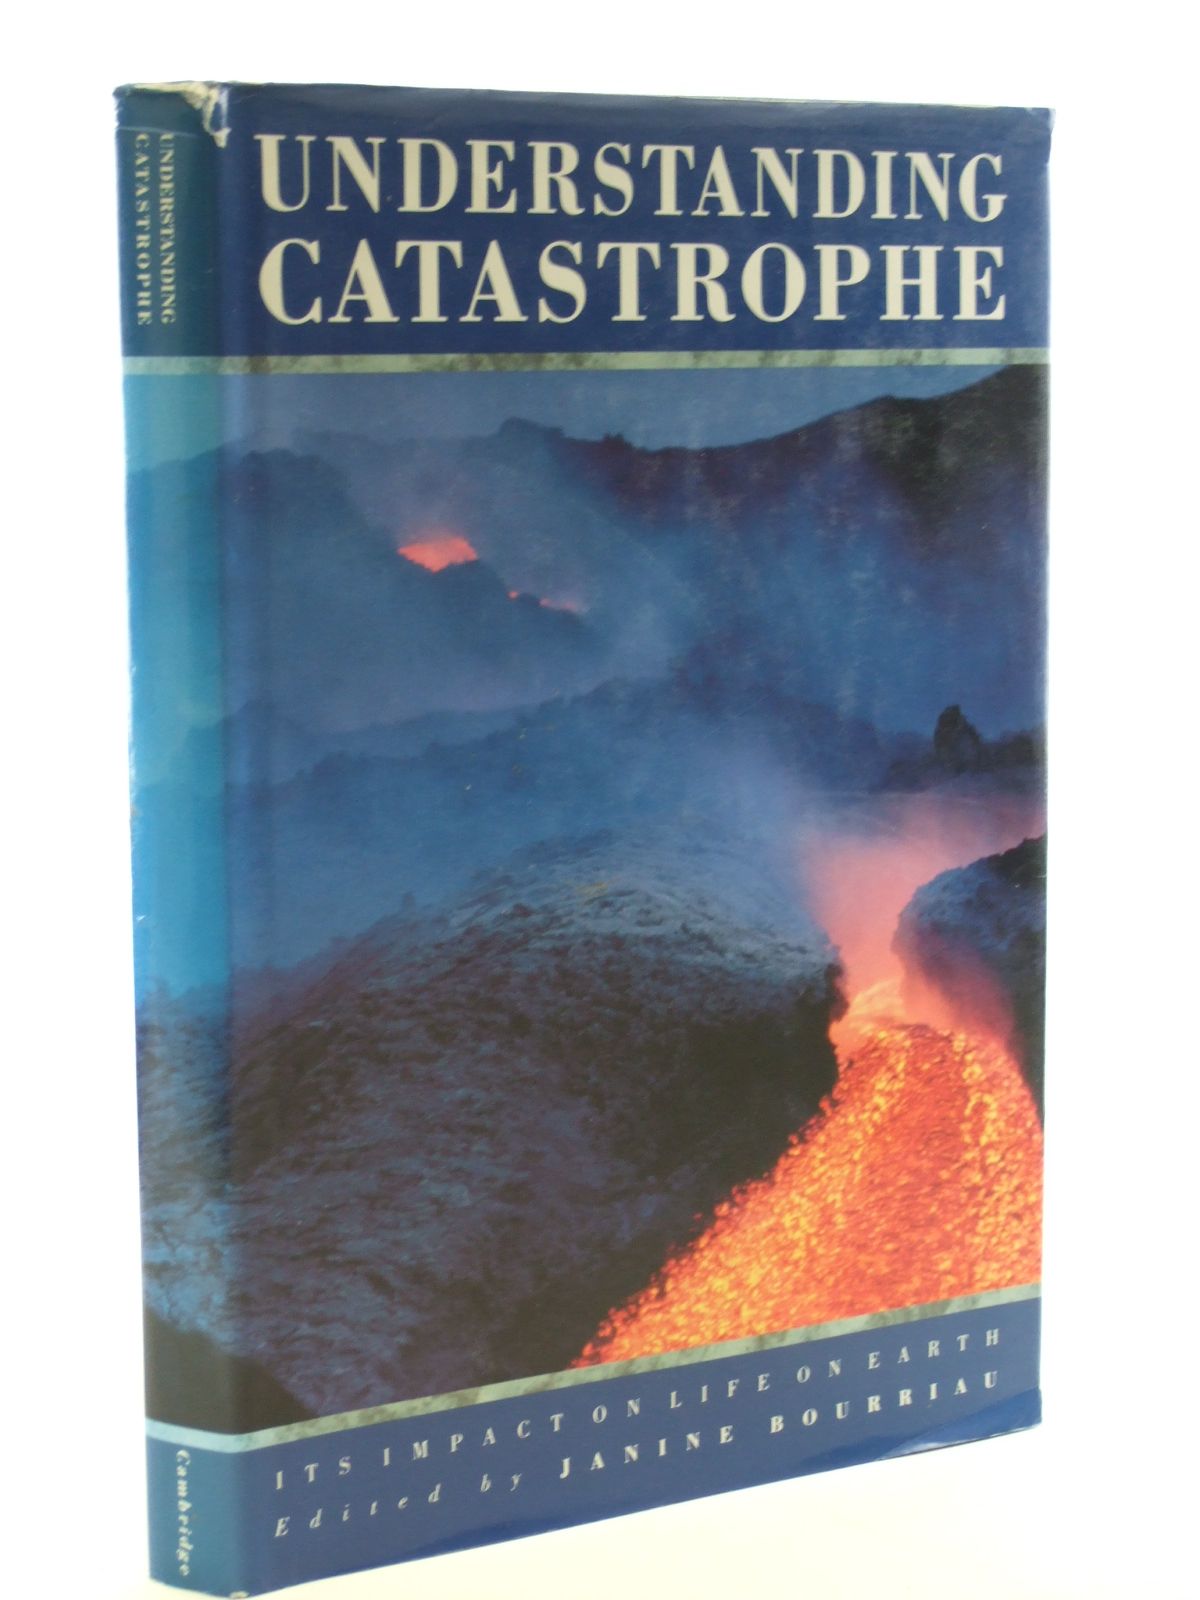 Photo of UNDERSTANDING CATASTROPHE written by Bourriau, Janine published by Cambridge University Press (STOCK CODE: 1602896)  for sale by Stella & Rose's Books